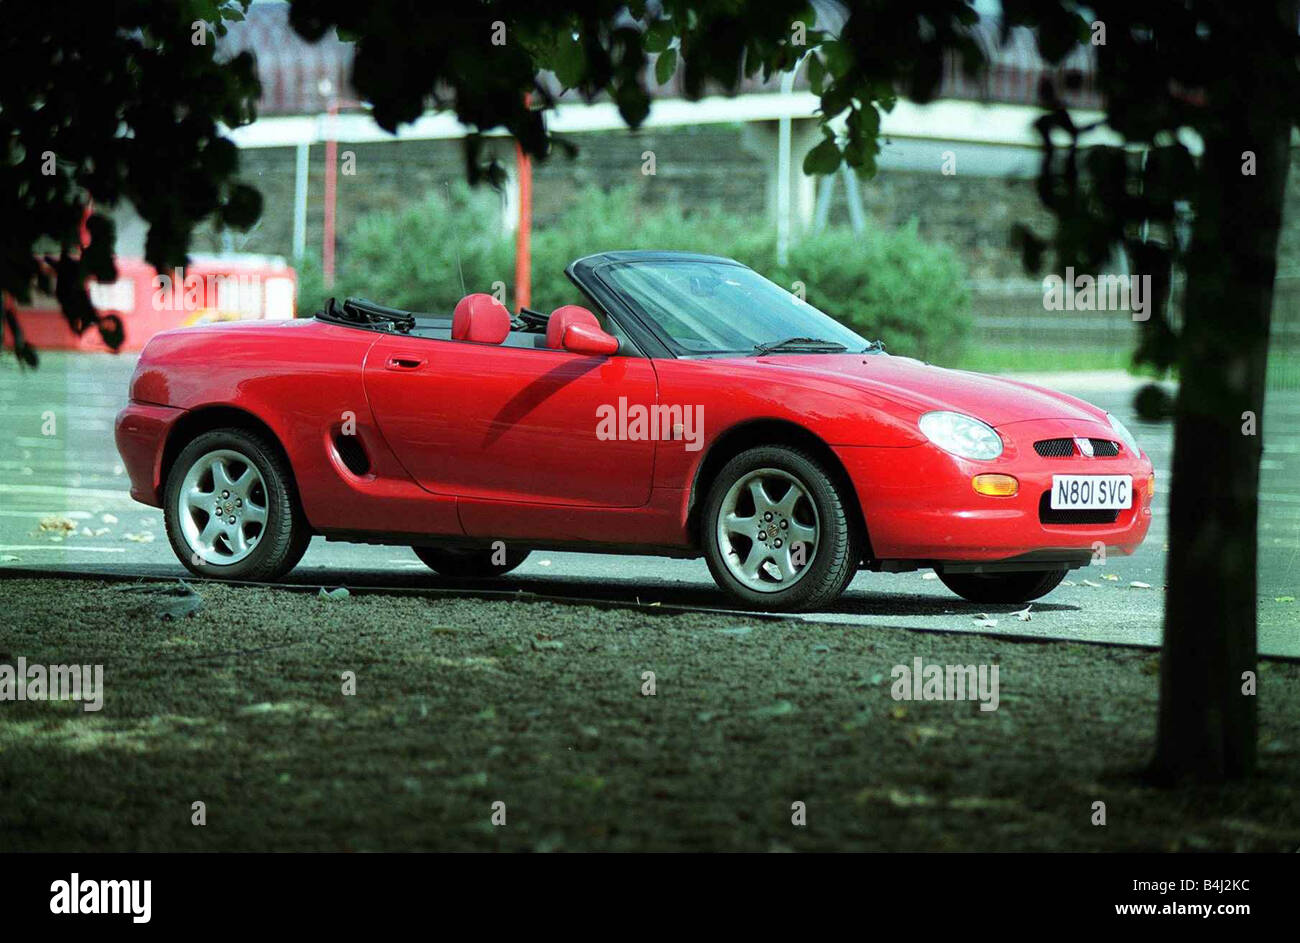 ROVERS SPORTY MGF CAR 29TH JULY 1997 RED MG SPORTS CAR Stock Photo